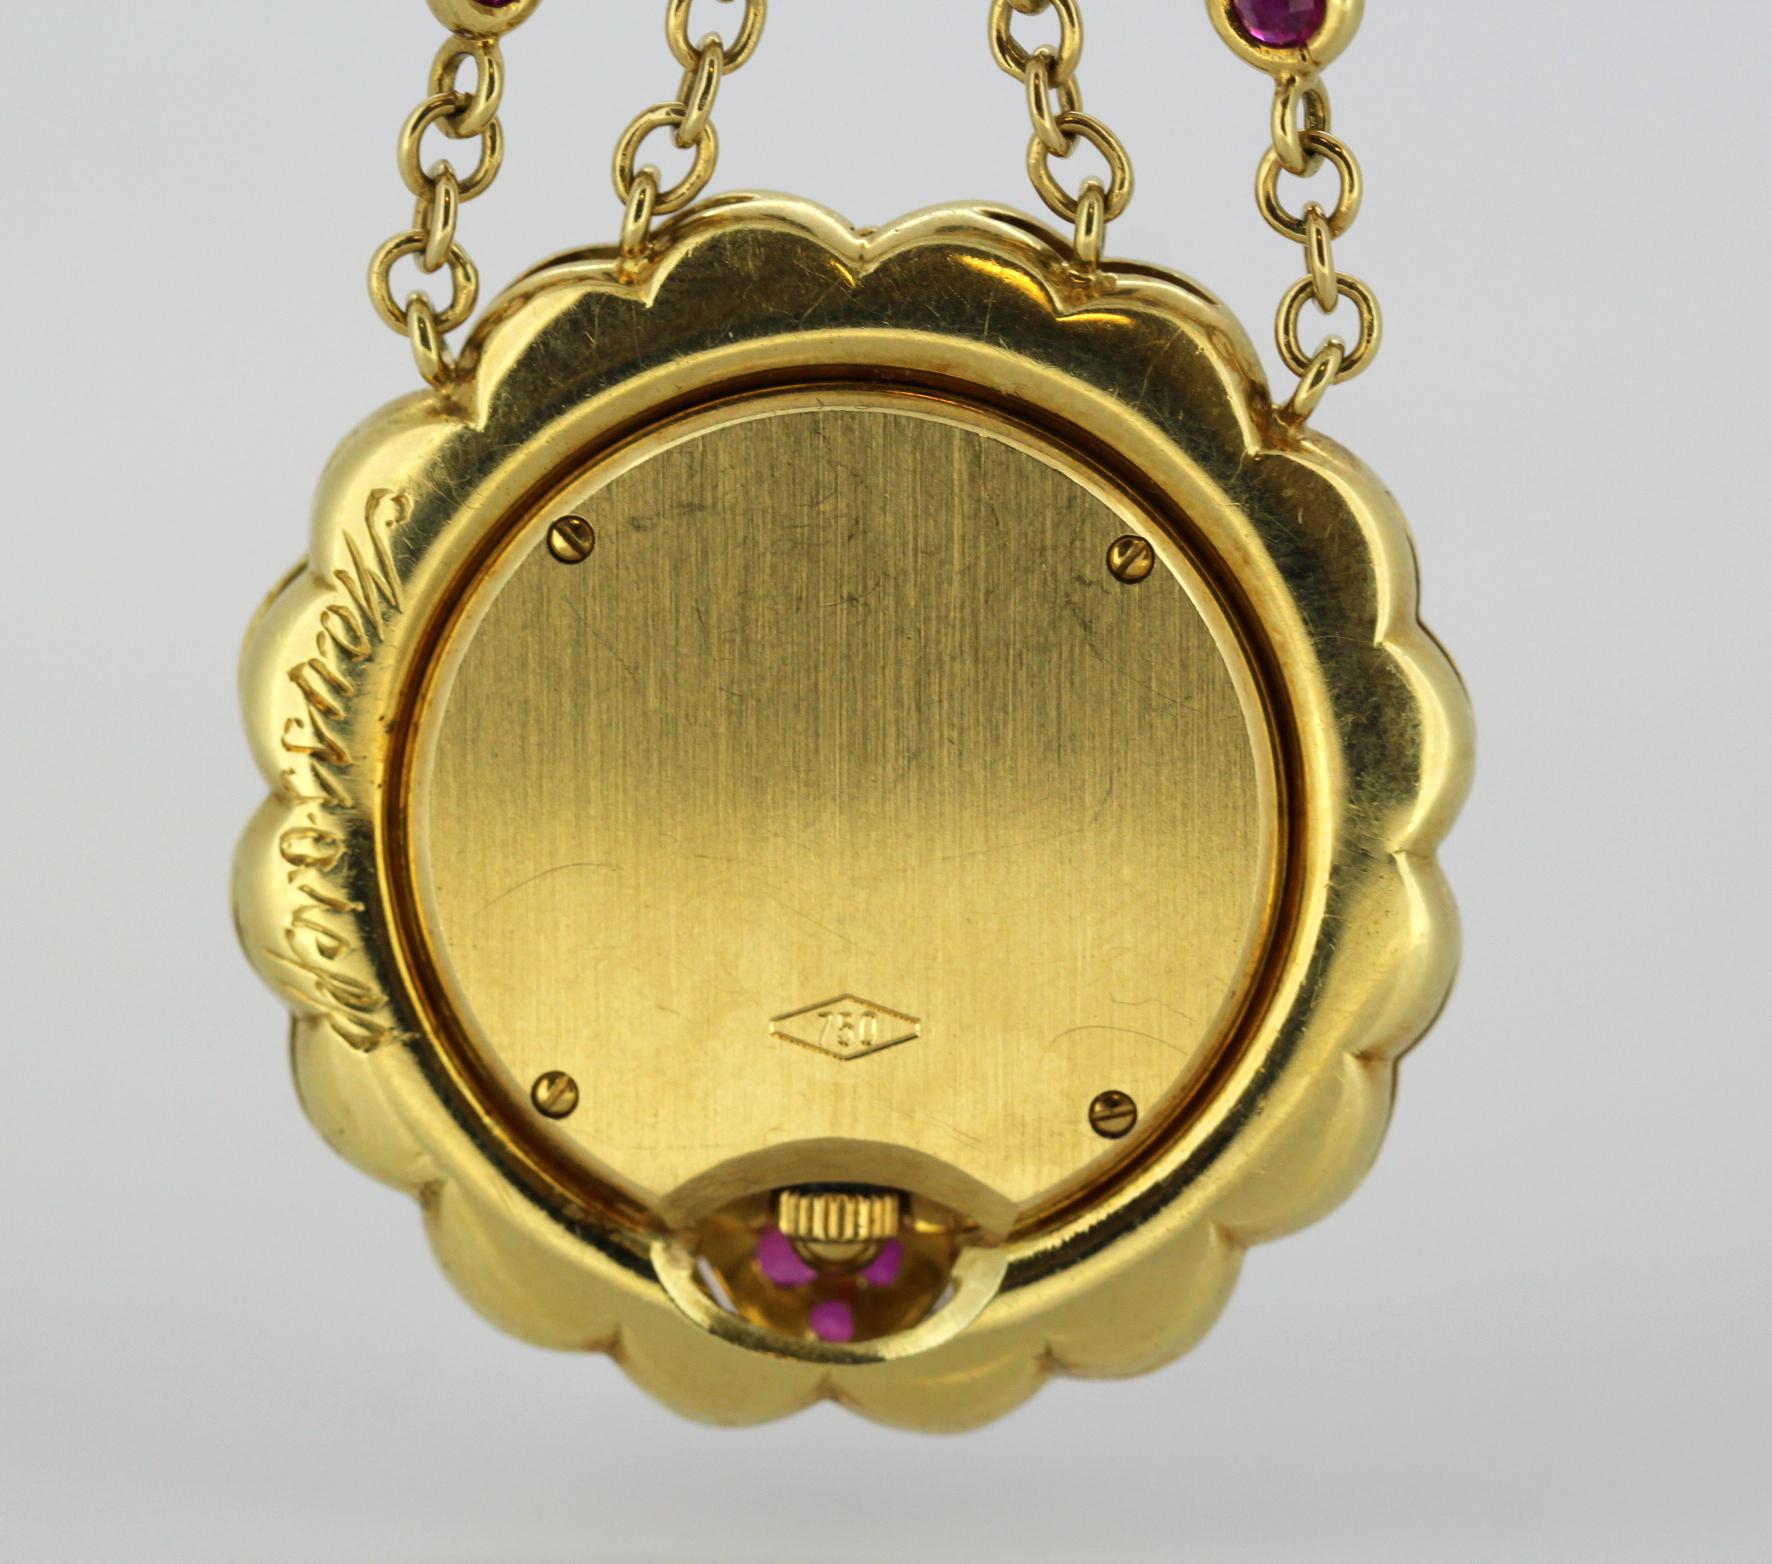 Moussaieff 18 Karat Gold Ladies Necklace Pendant Watch with Diamonds and Rubies 6